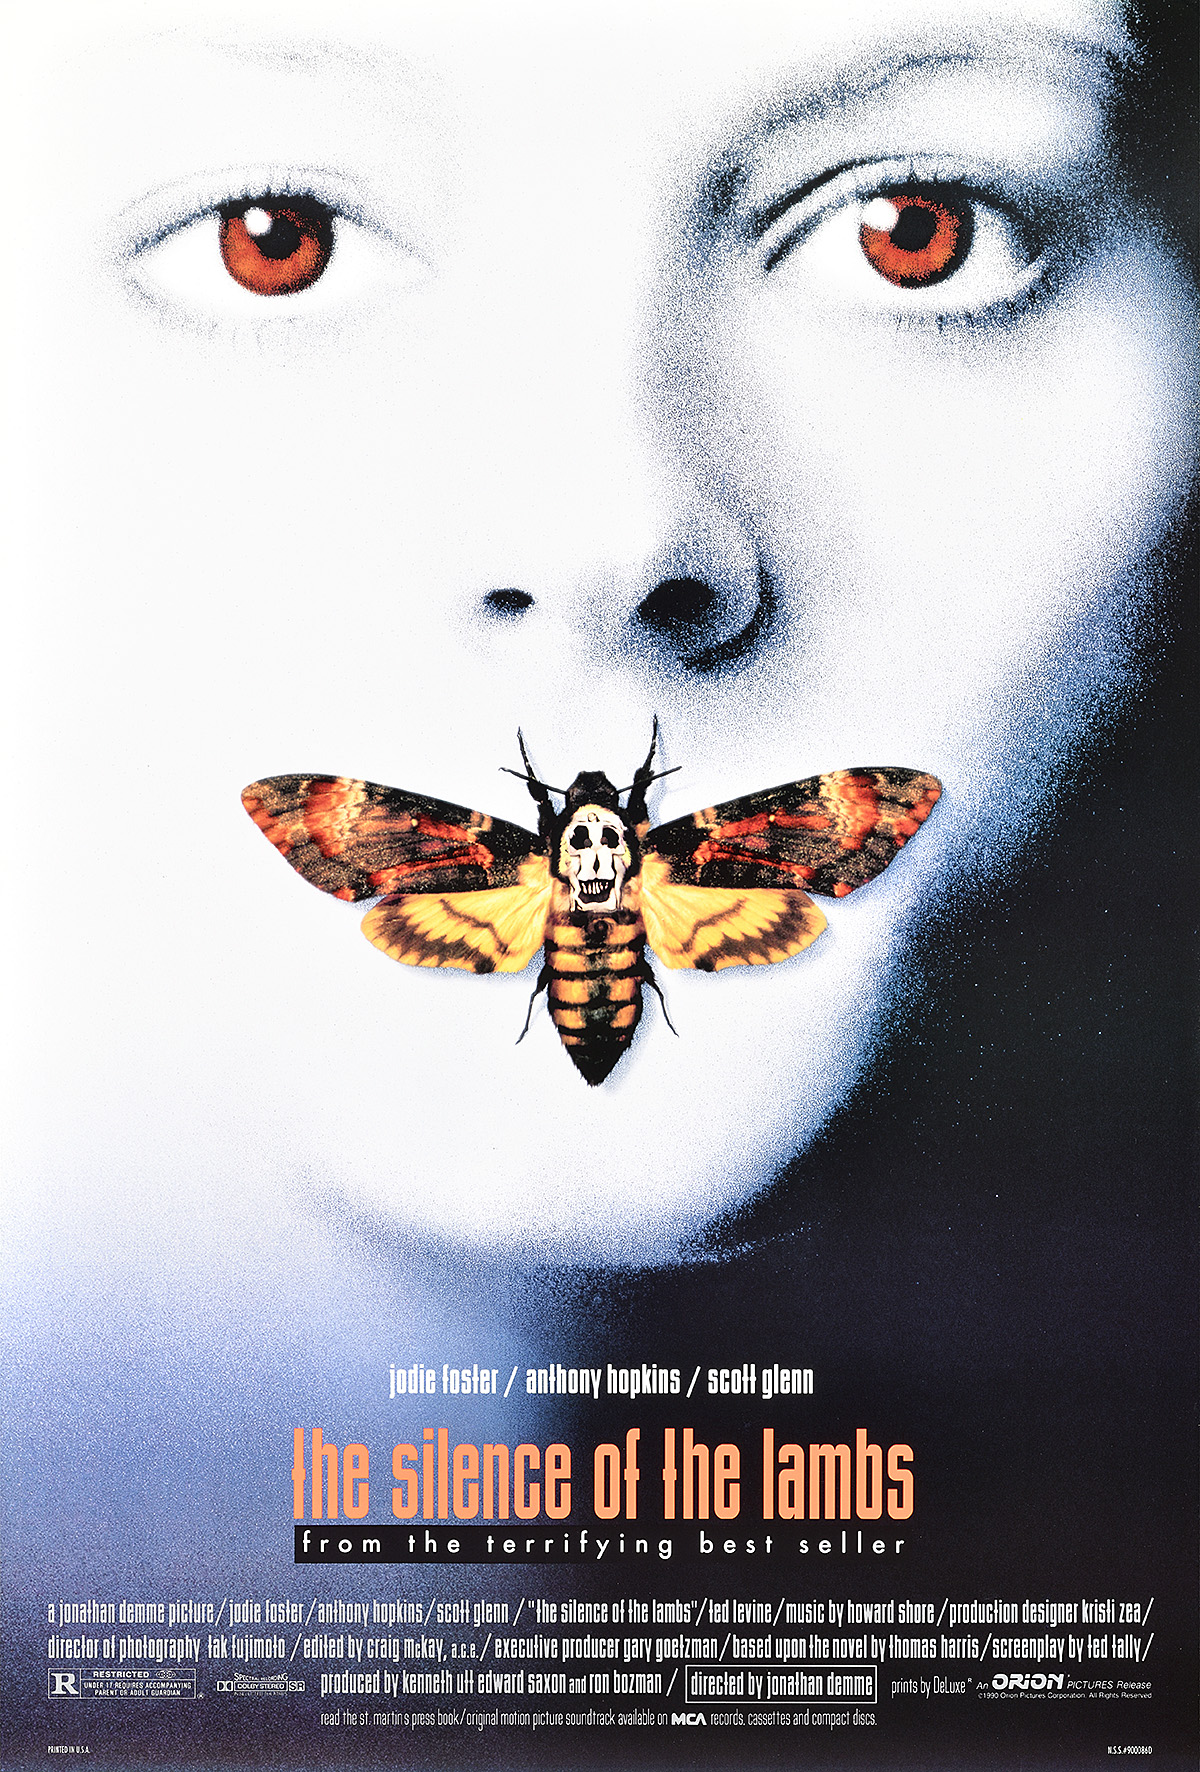 Poster of a ghostly face with a death's head moth over the mouth.